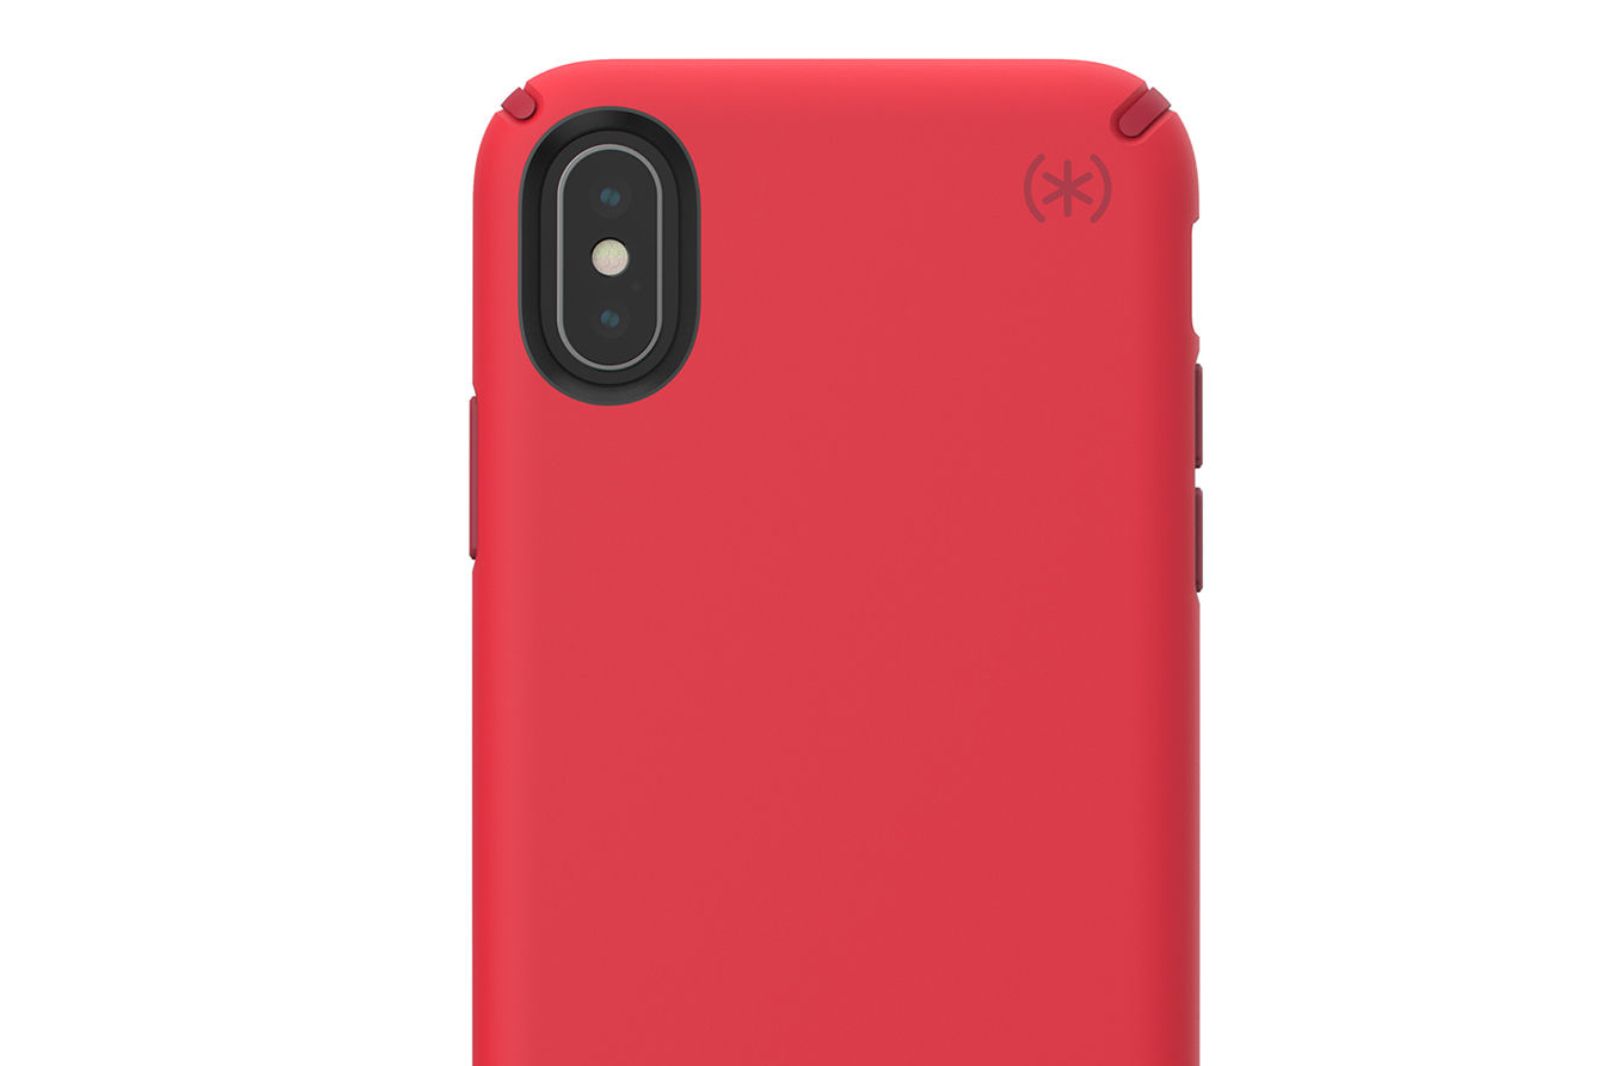 Looking for the best case for your iPhone XR or XS Heres 5 reasons why its Presidio Pro from Speck image 1